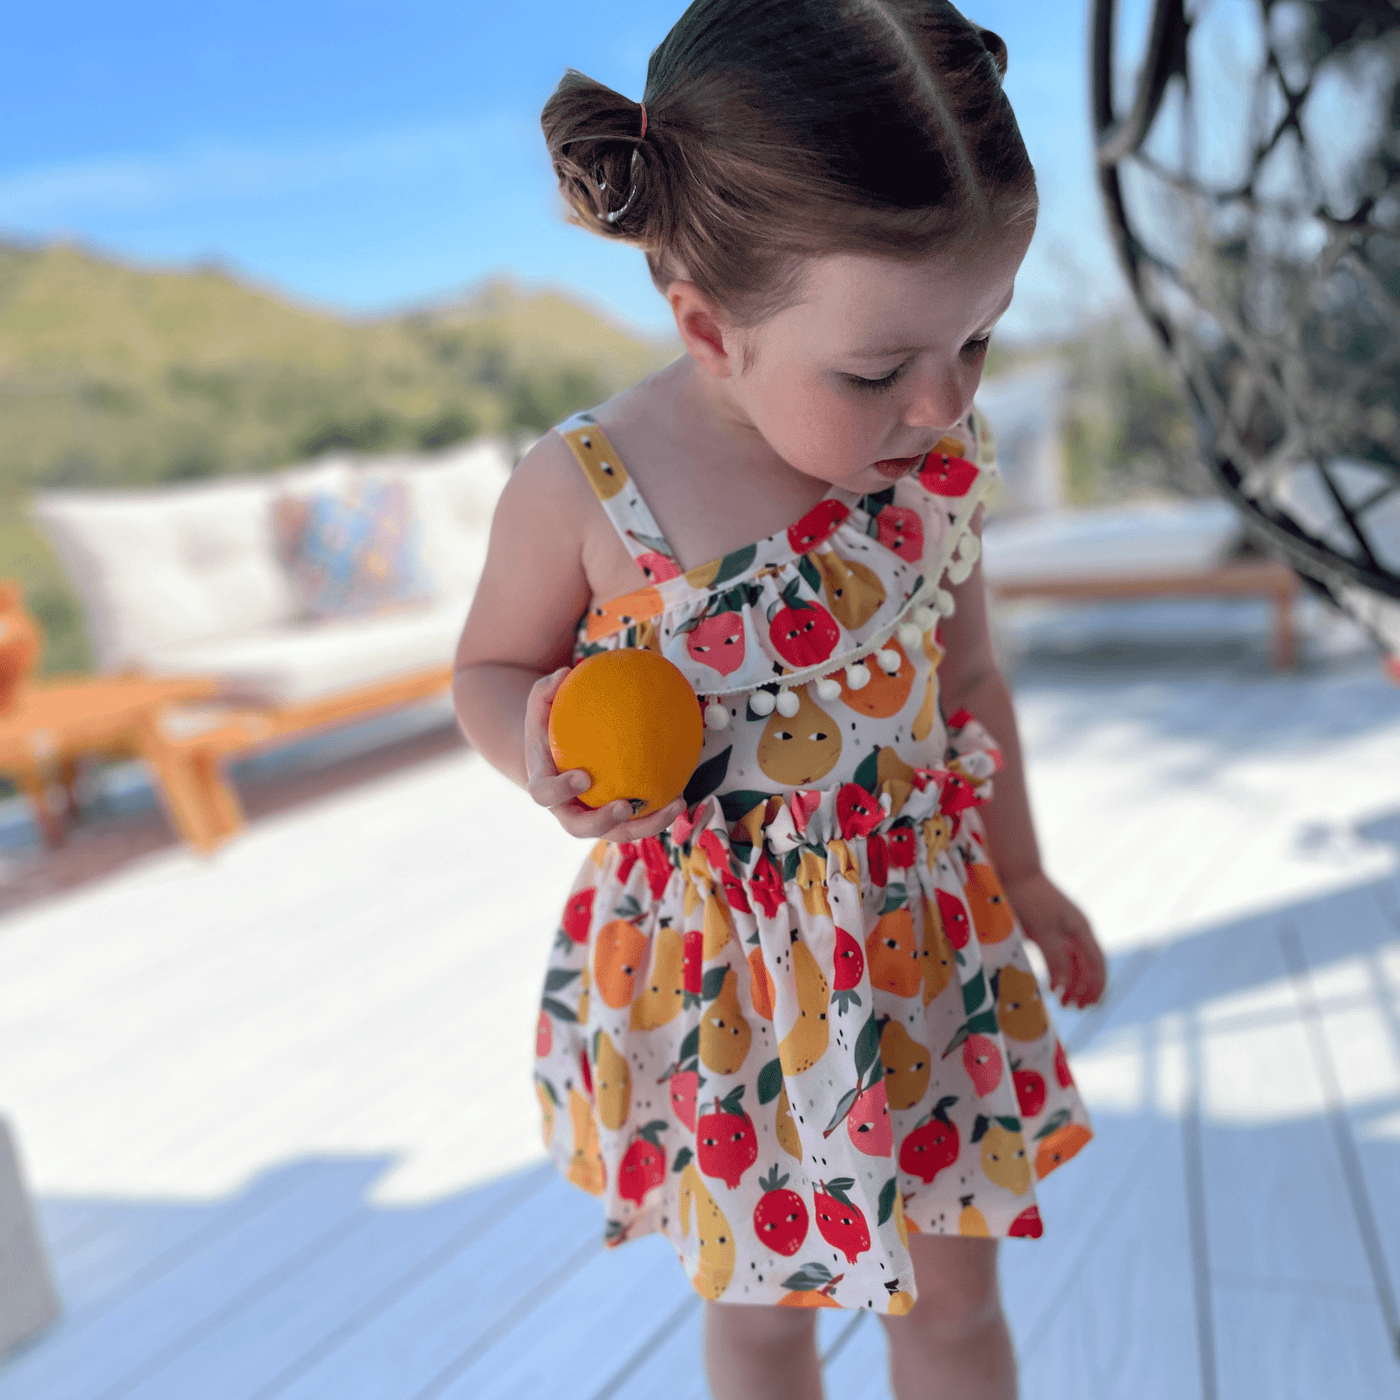 Best Day Ever Kids swimsuit coverup Fancy Fruit Skover-Up buy online boutique kids clothing